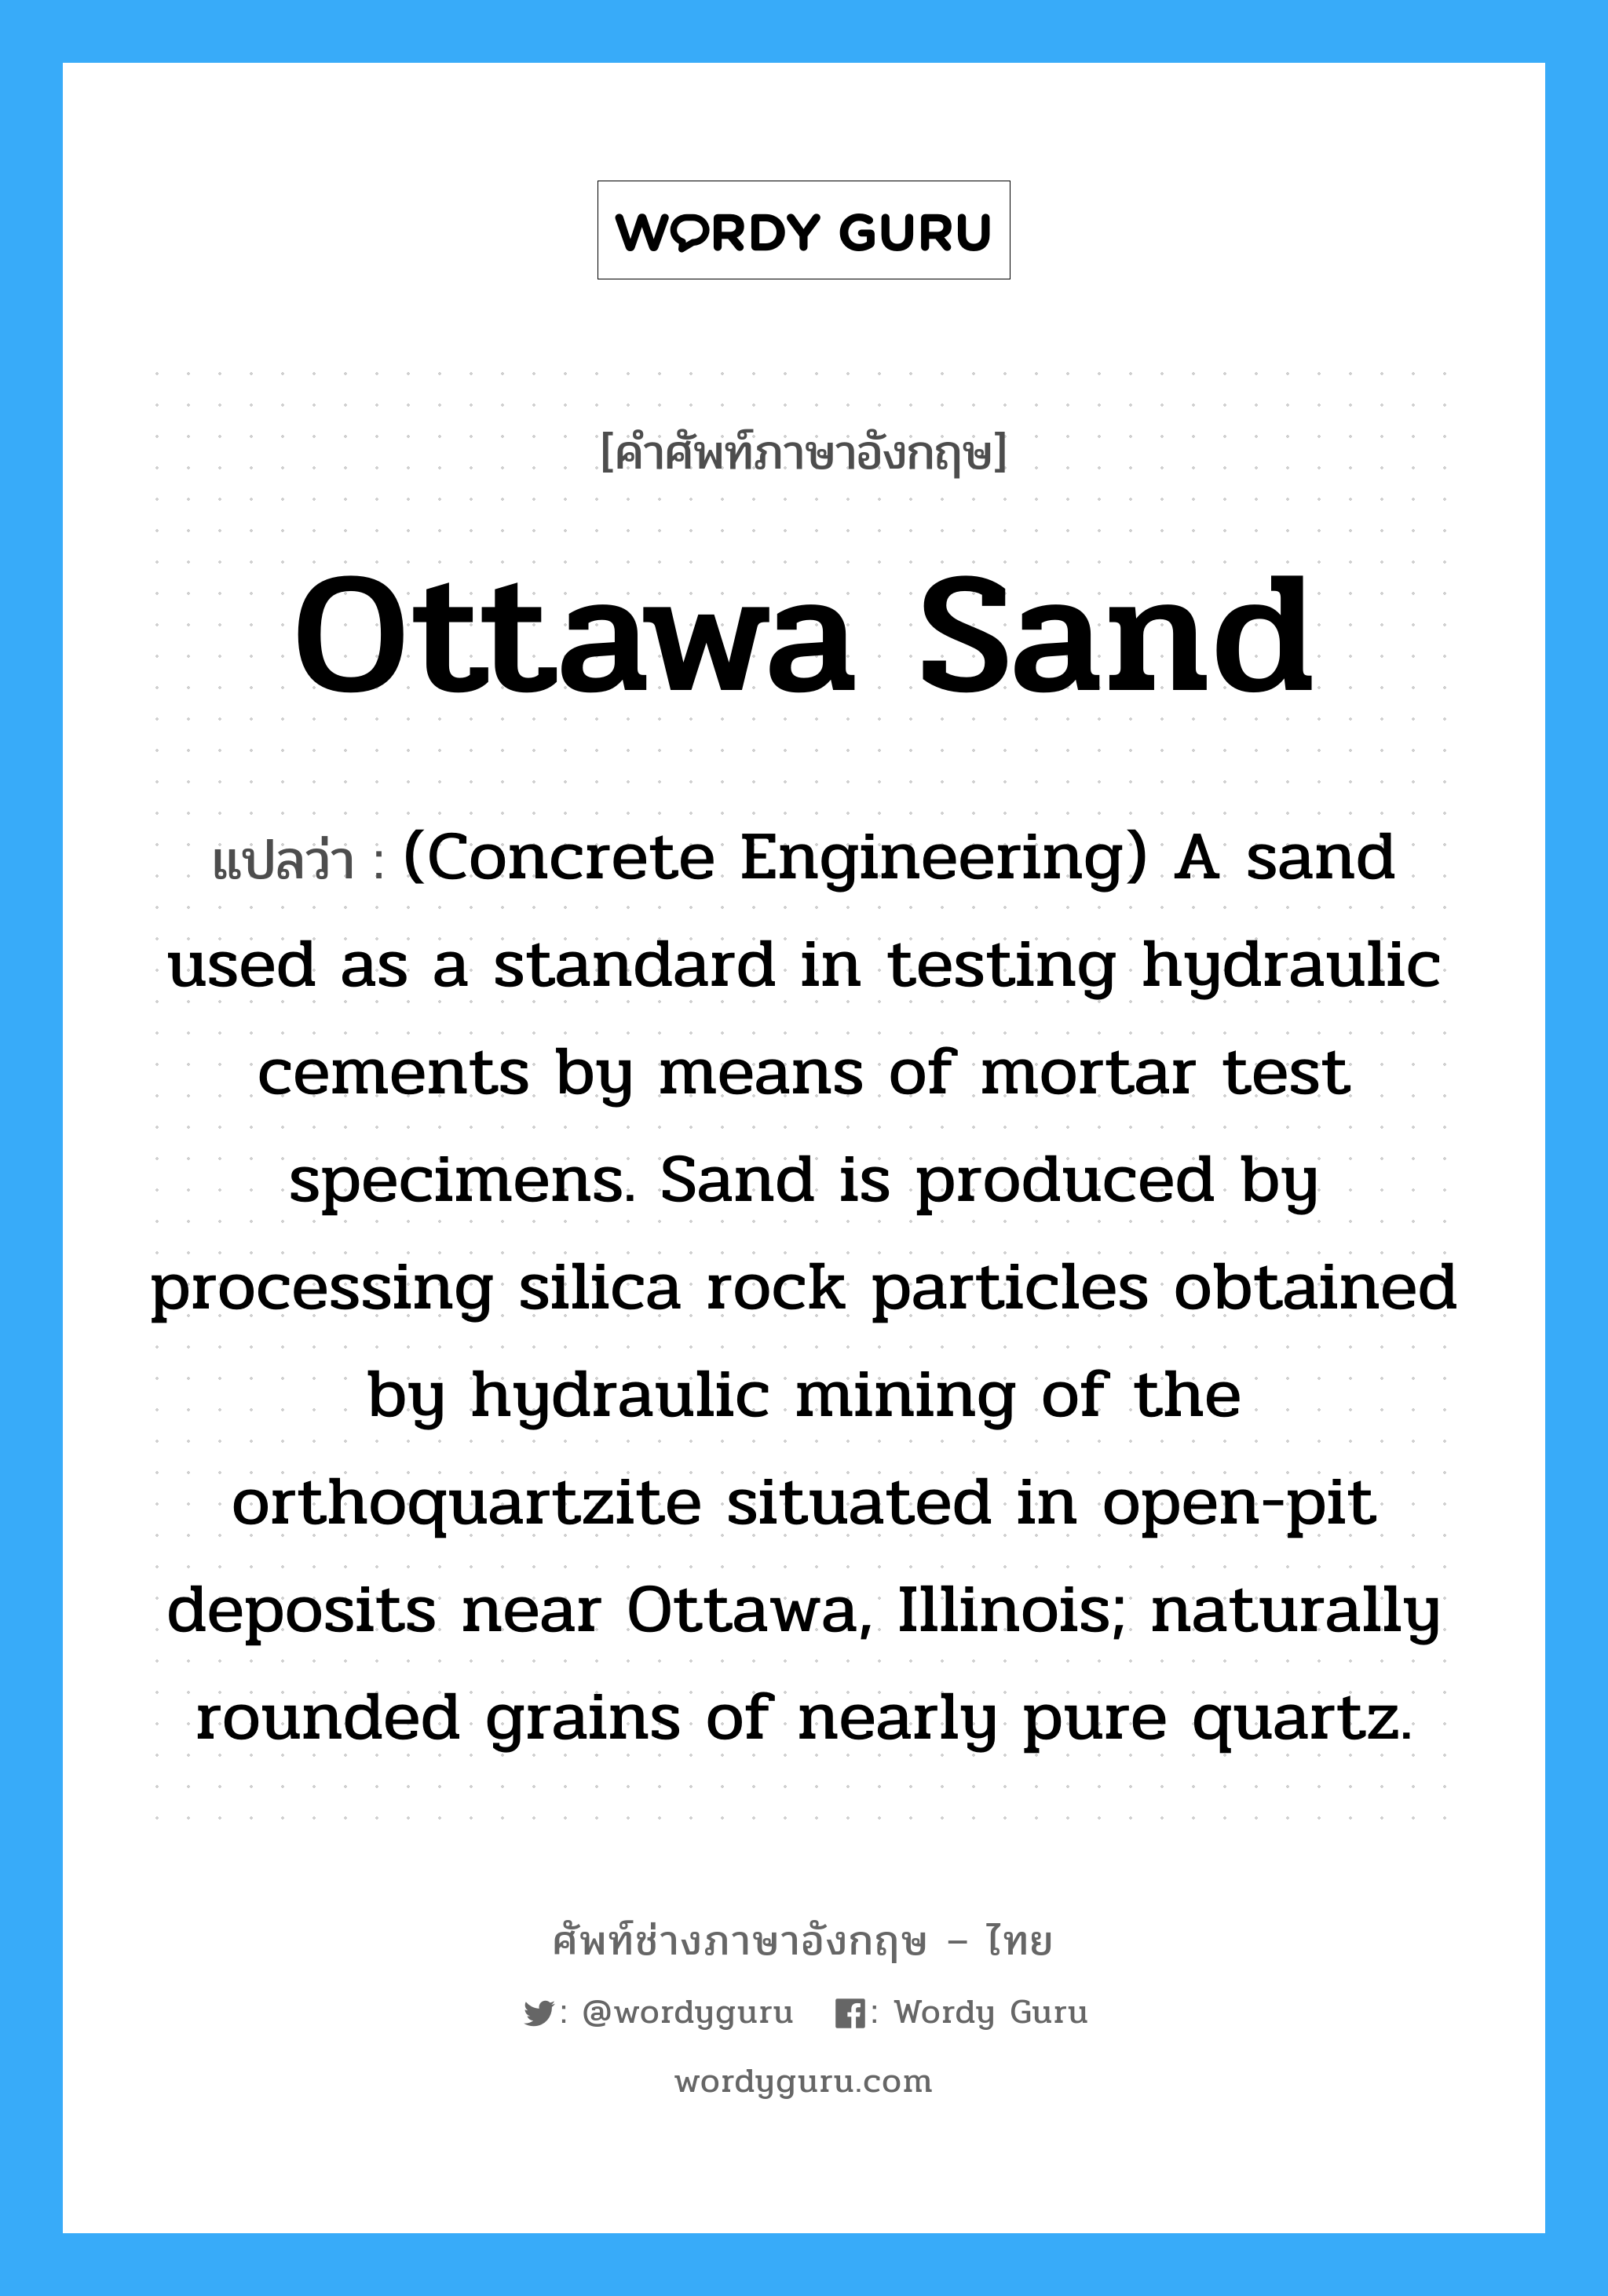 Ottawa Sand แปลว่า?, คำศัพท์ช่างภาษาอังกฤษ - ไทย Ottawa Sand คำศัพท์ภาษาอังกฤษ Ottawa Sand แปลว่า (Concrete Engineering) A sand used as a standard in testing hydraulic cements by means of mortar test specimens. Sand is produced by processing silica rock particles obtained by hydraulic mining of the orthoquartzite situated in open-pit deposits near Ottawa, Illinois; naturally rounded grains of nearly pure quartz.